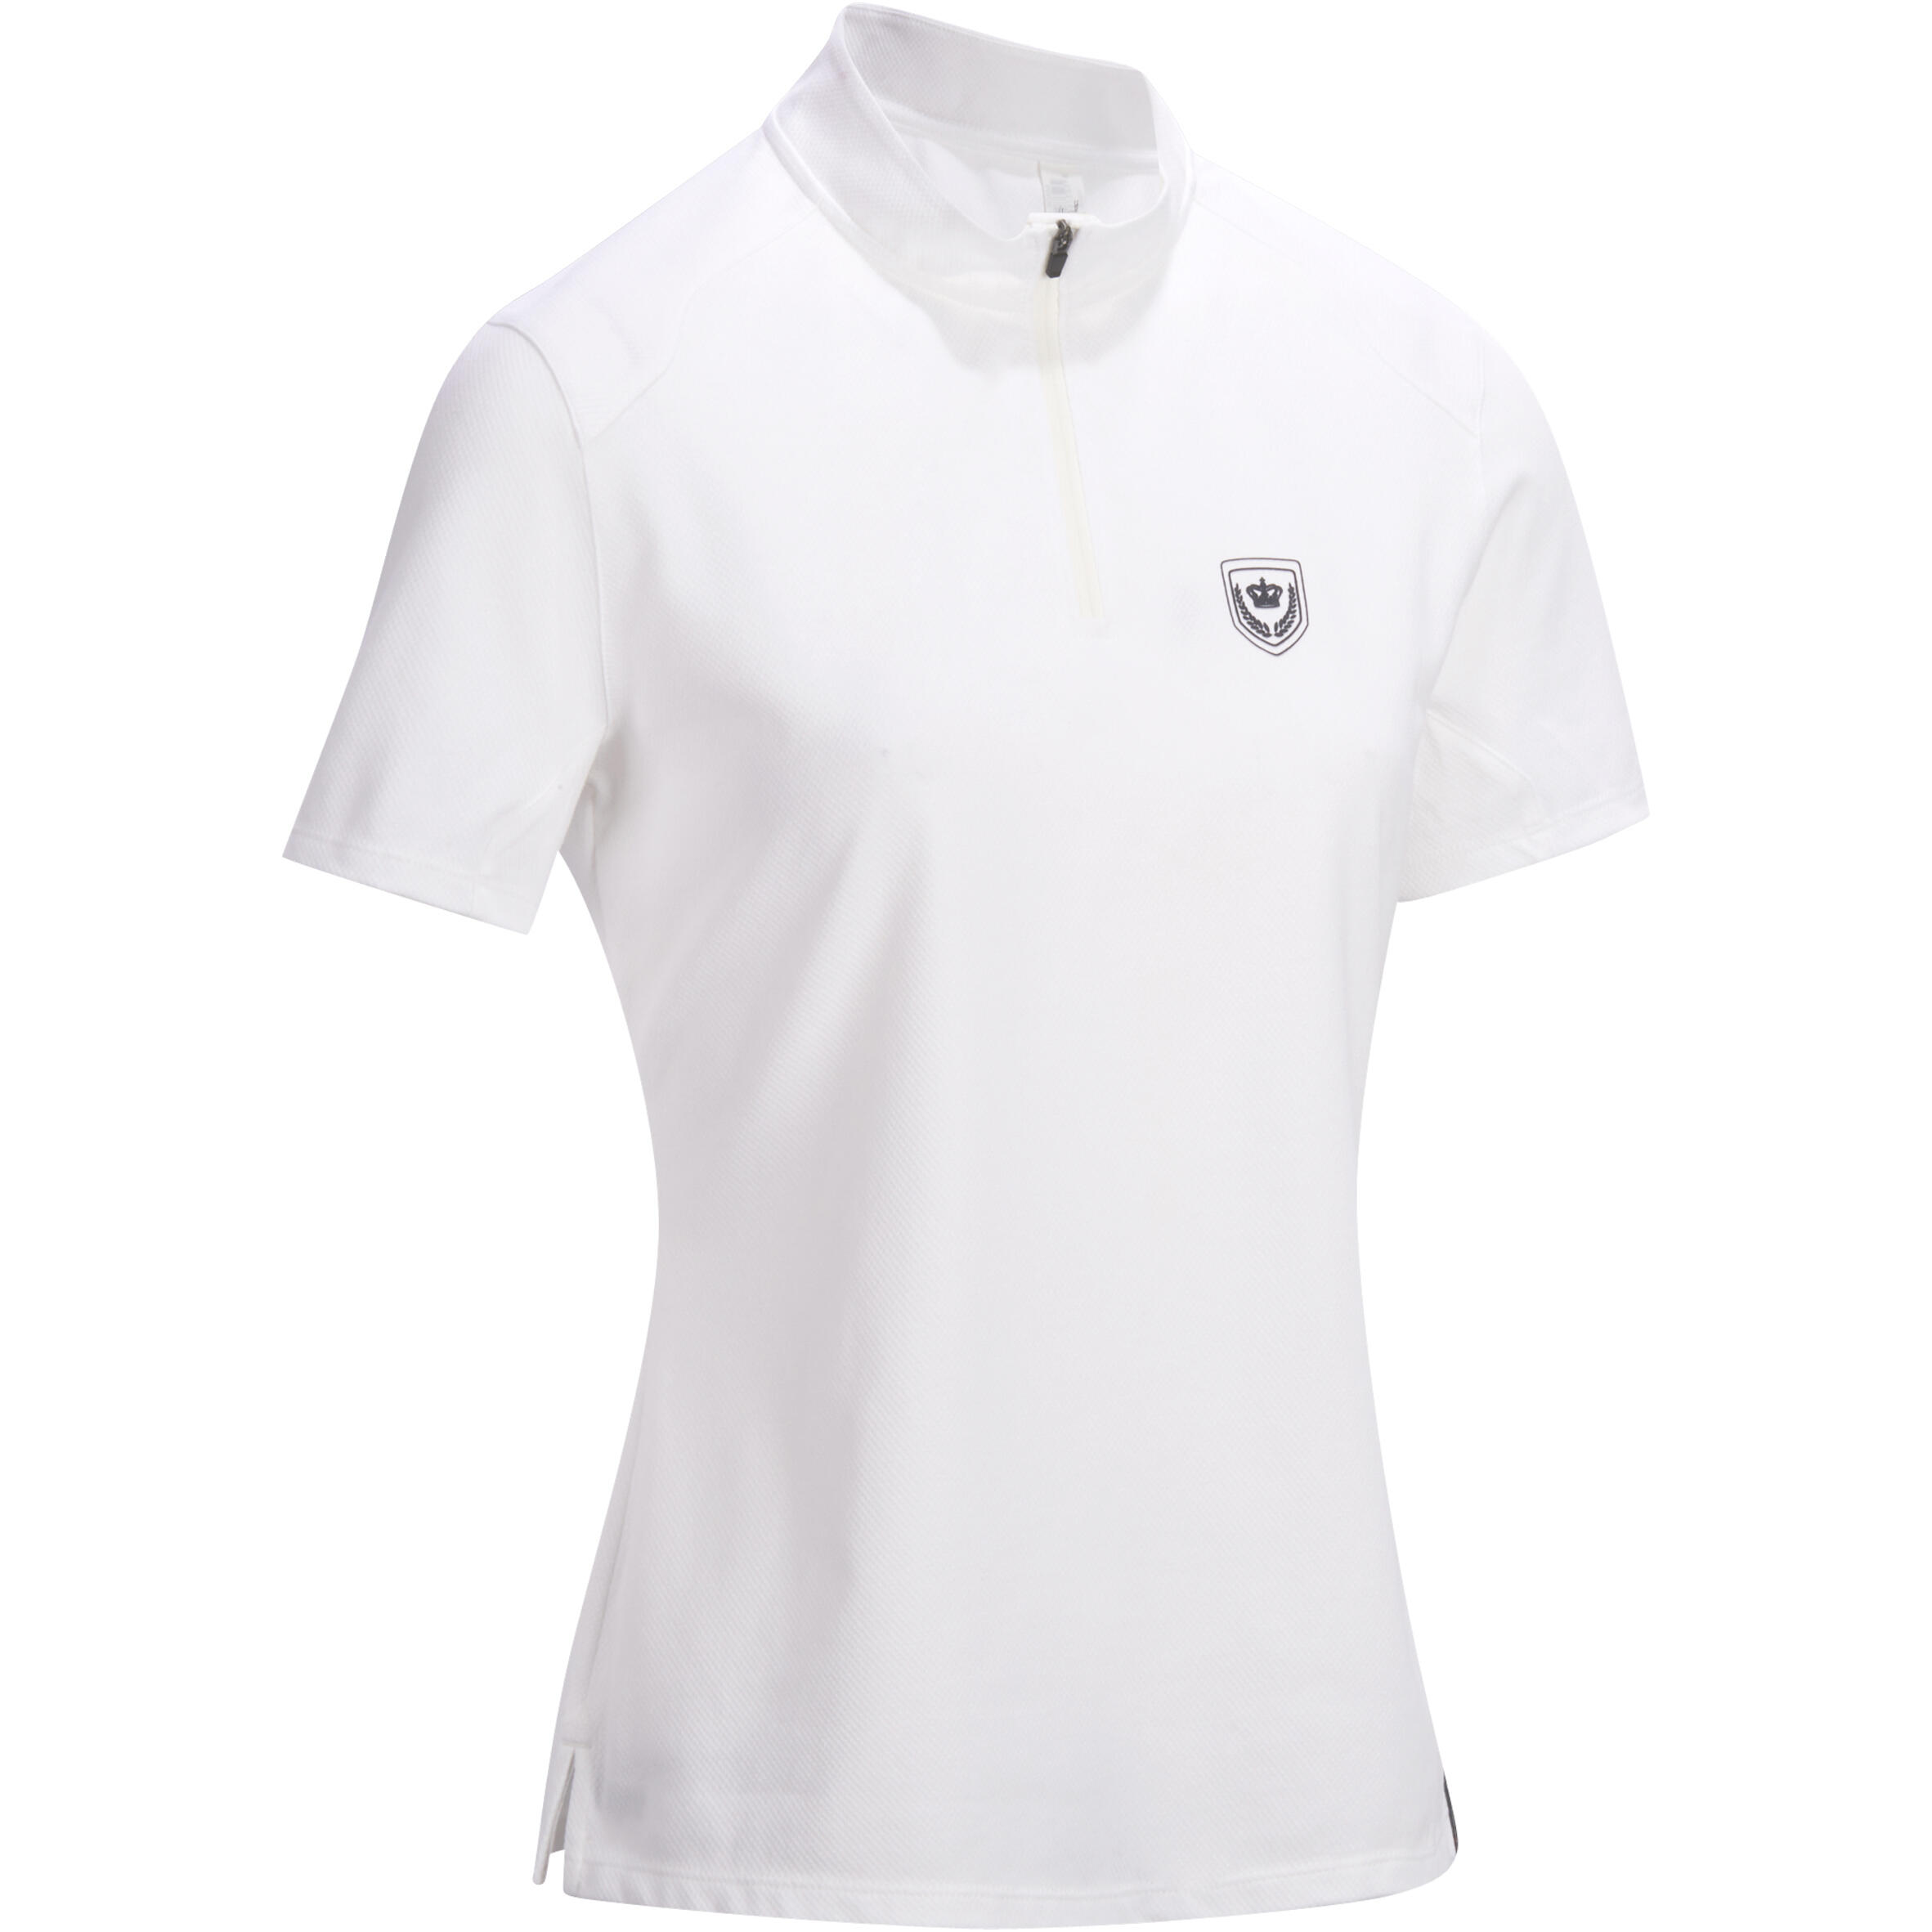 500 Women's Short-Sleeved Horse Riding Competition Polo Shirt - White 1/11